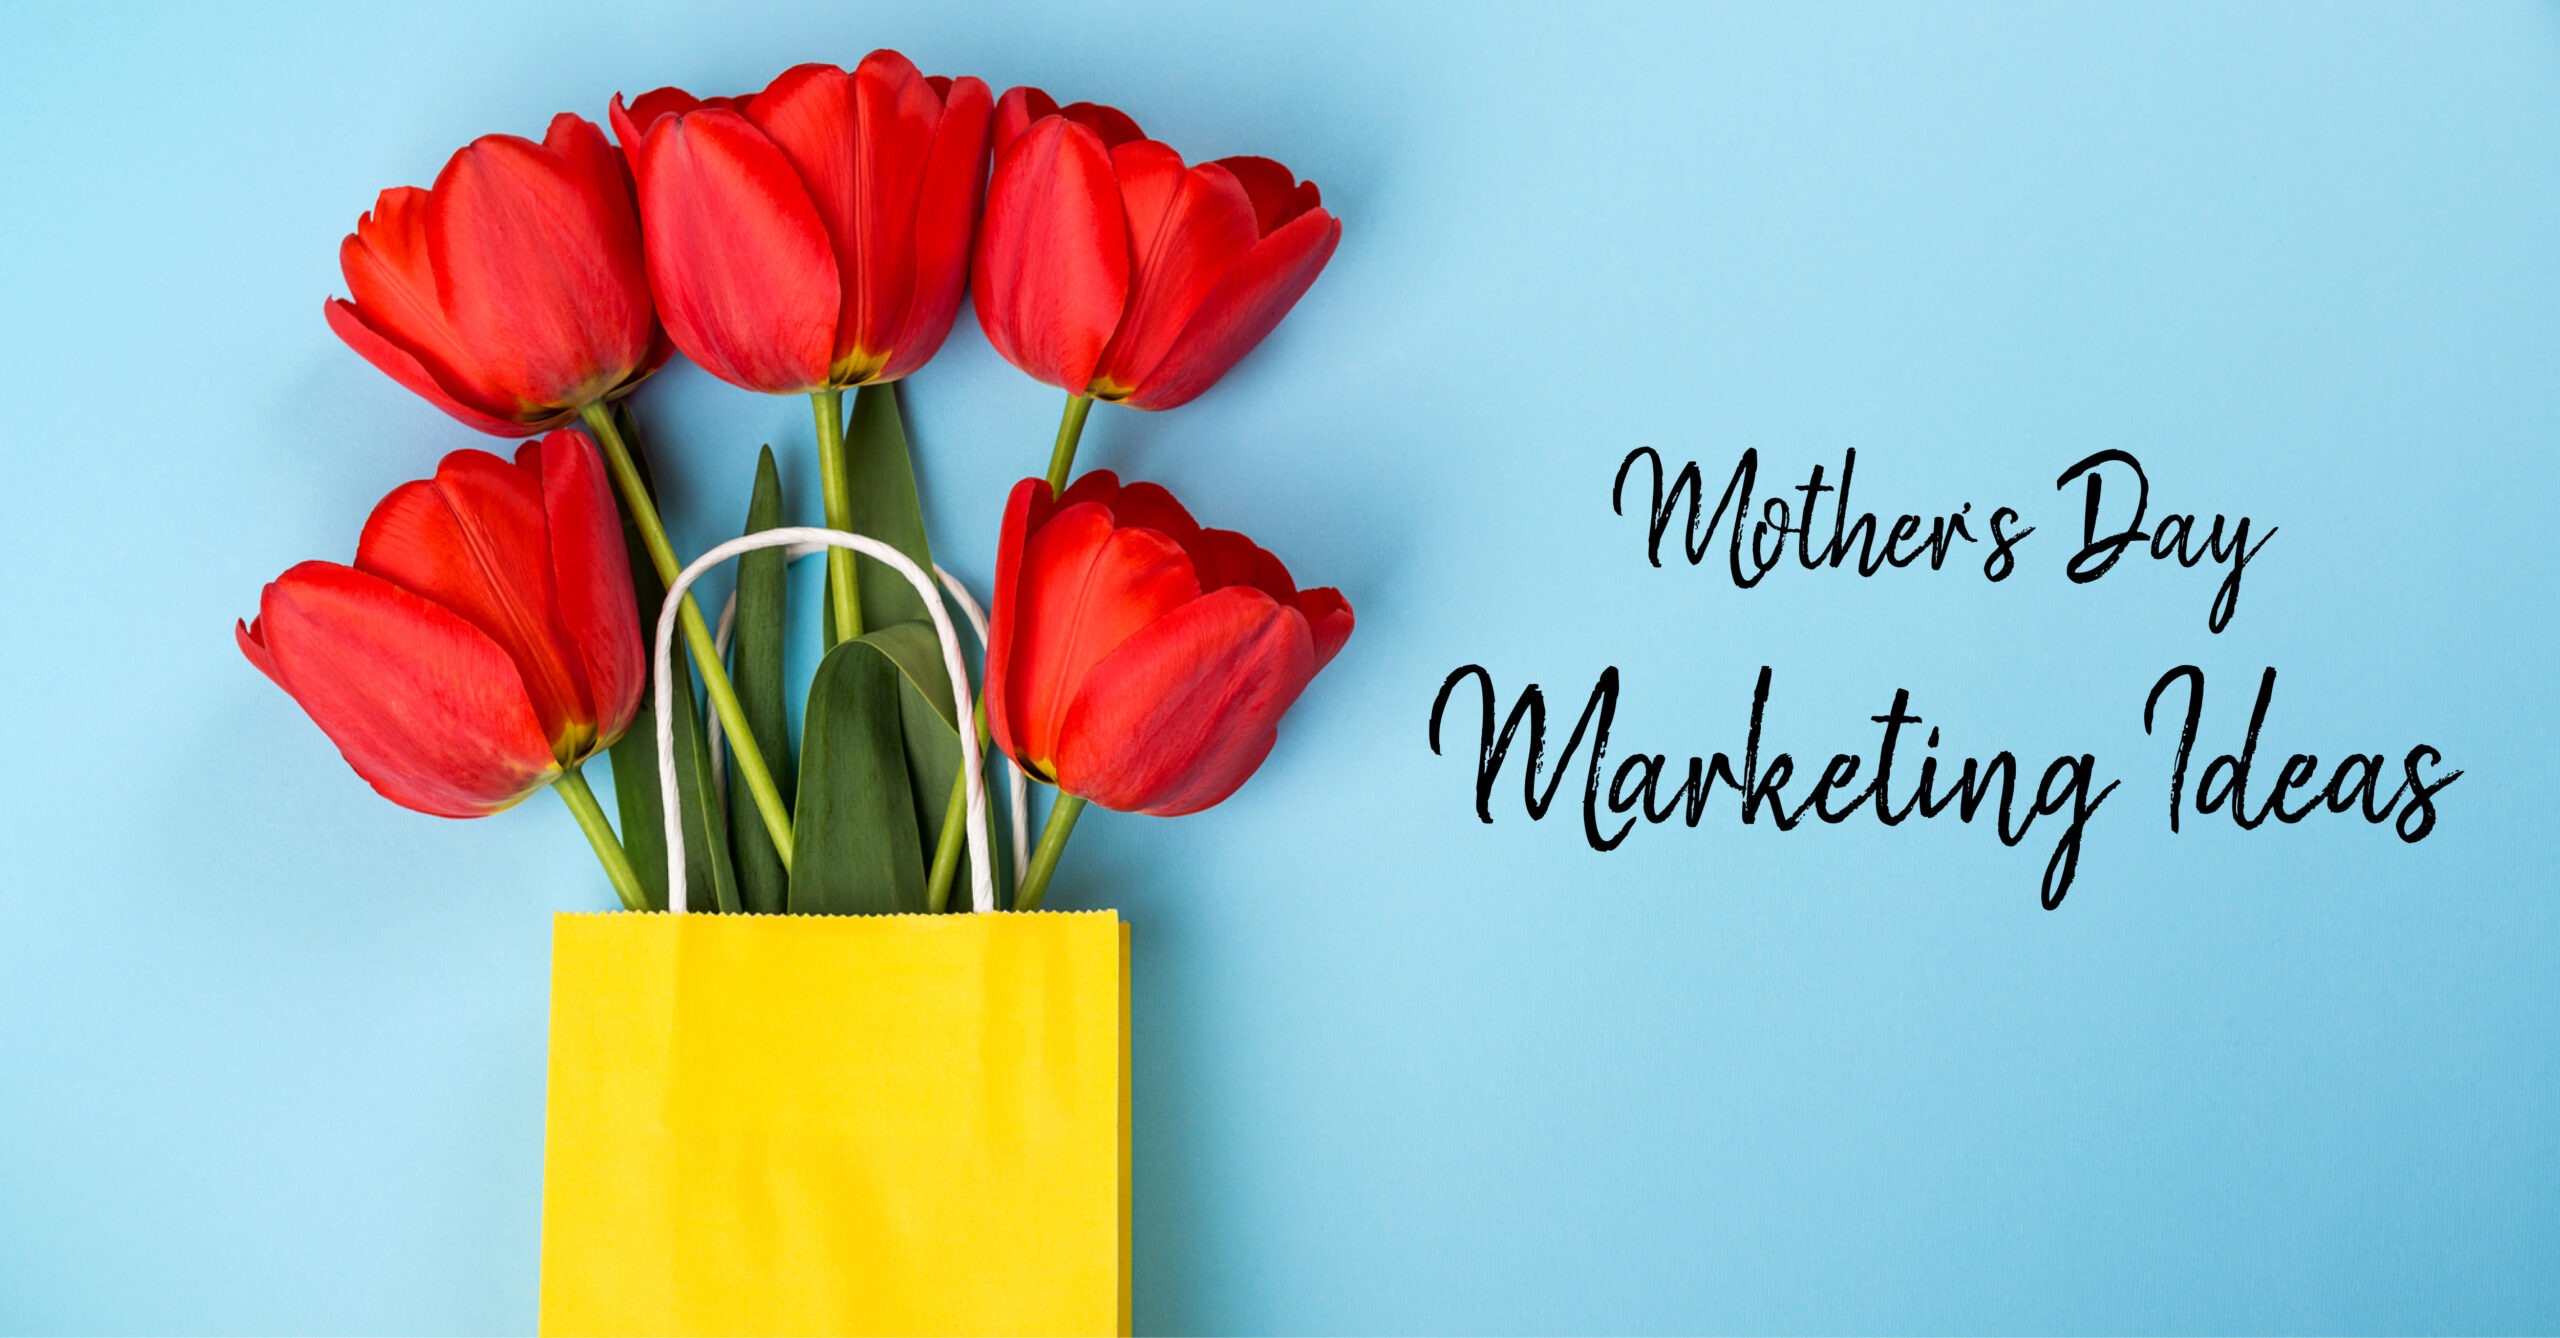 Mother’s Day Marketing Ideas